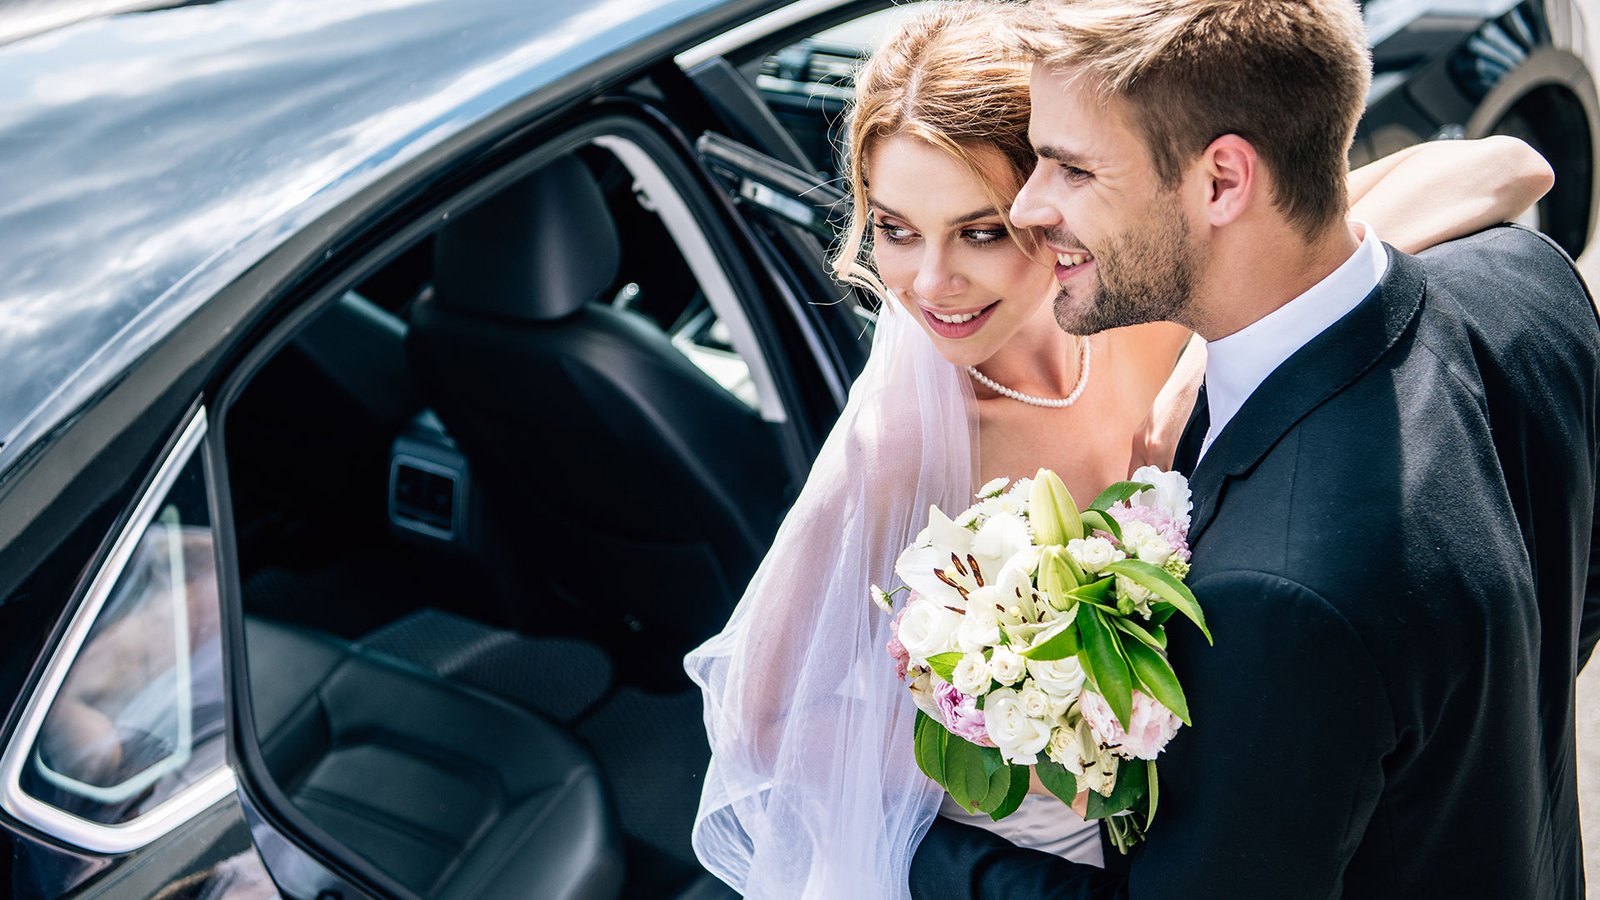 Image of a newly wed couple in a luxury vehicle being driven away.